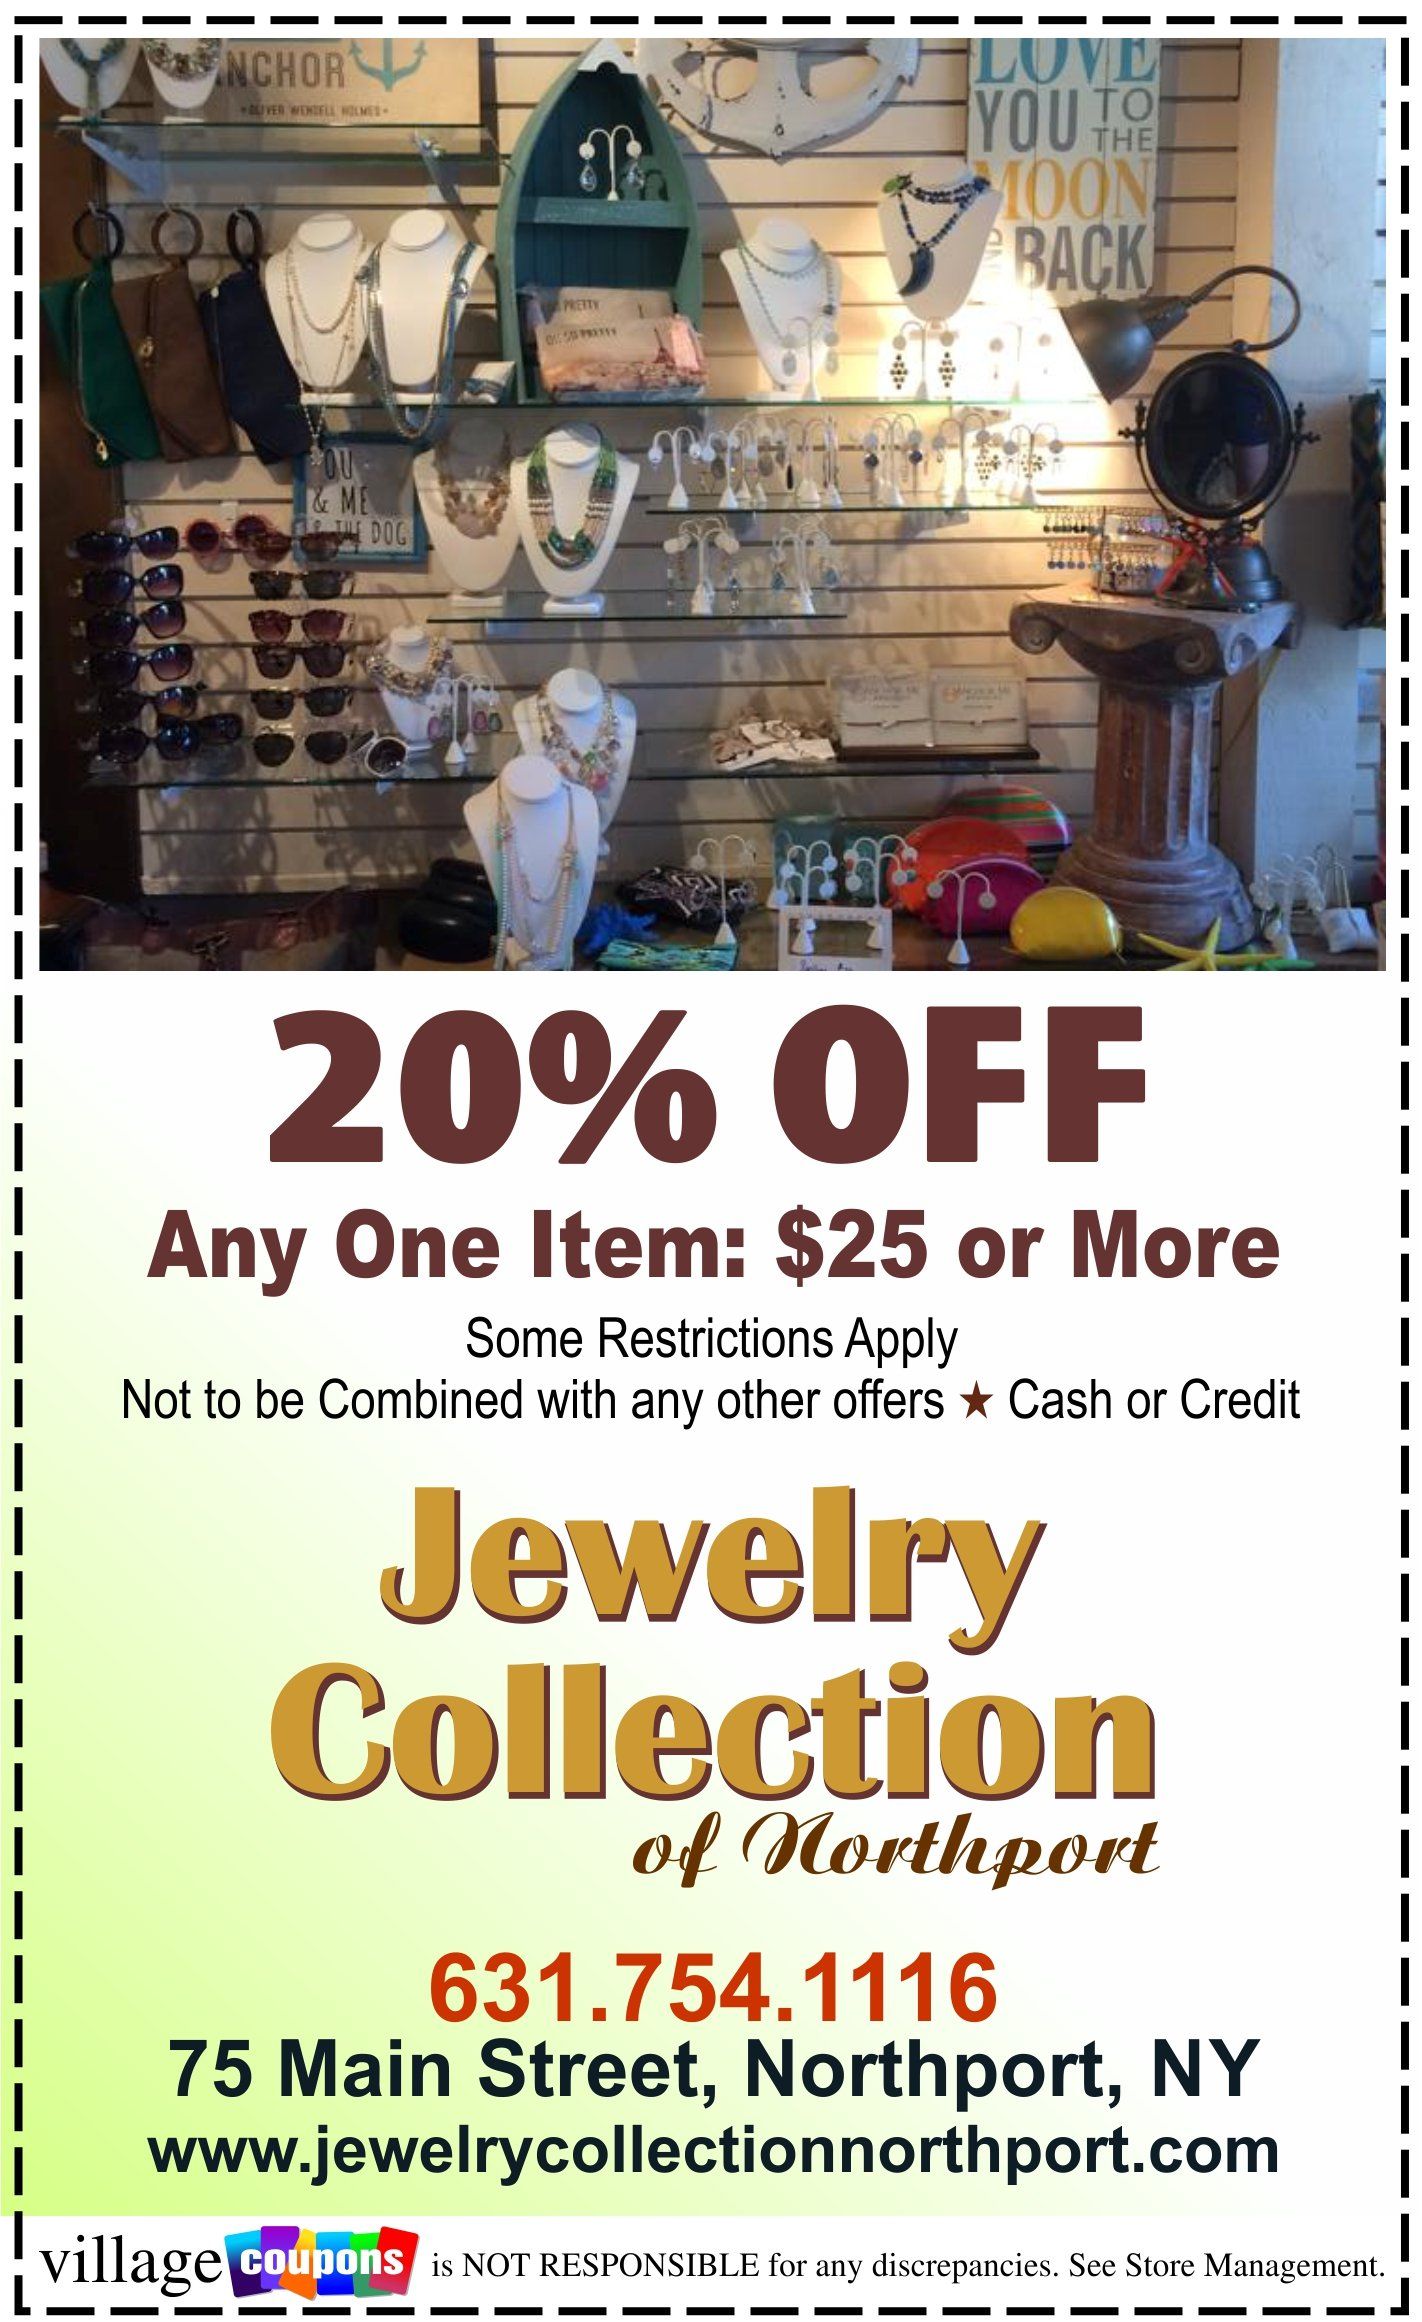 A coupon for the jewelry collection of northport ny